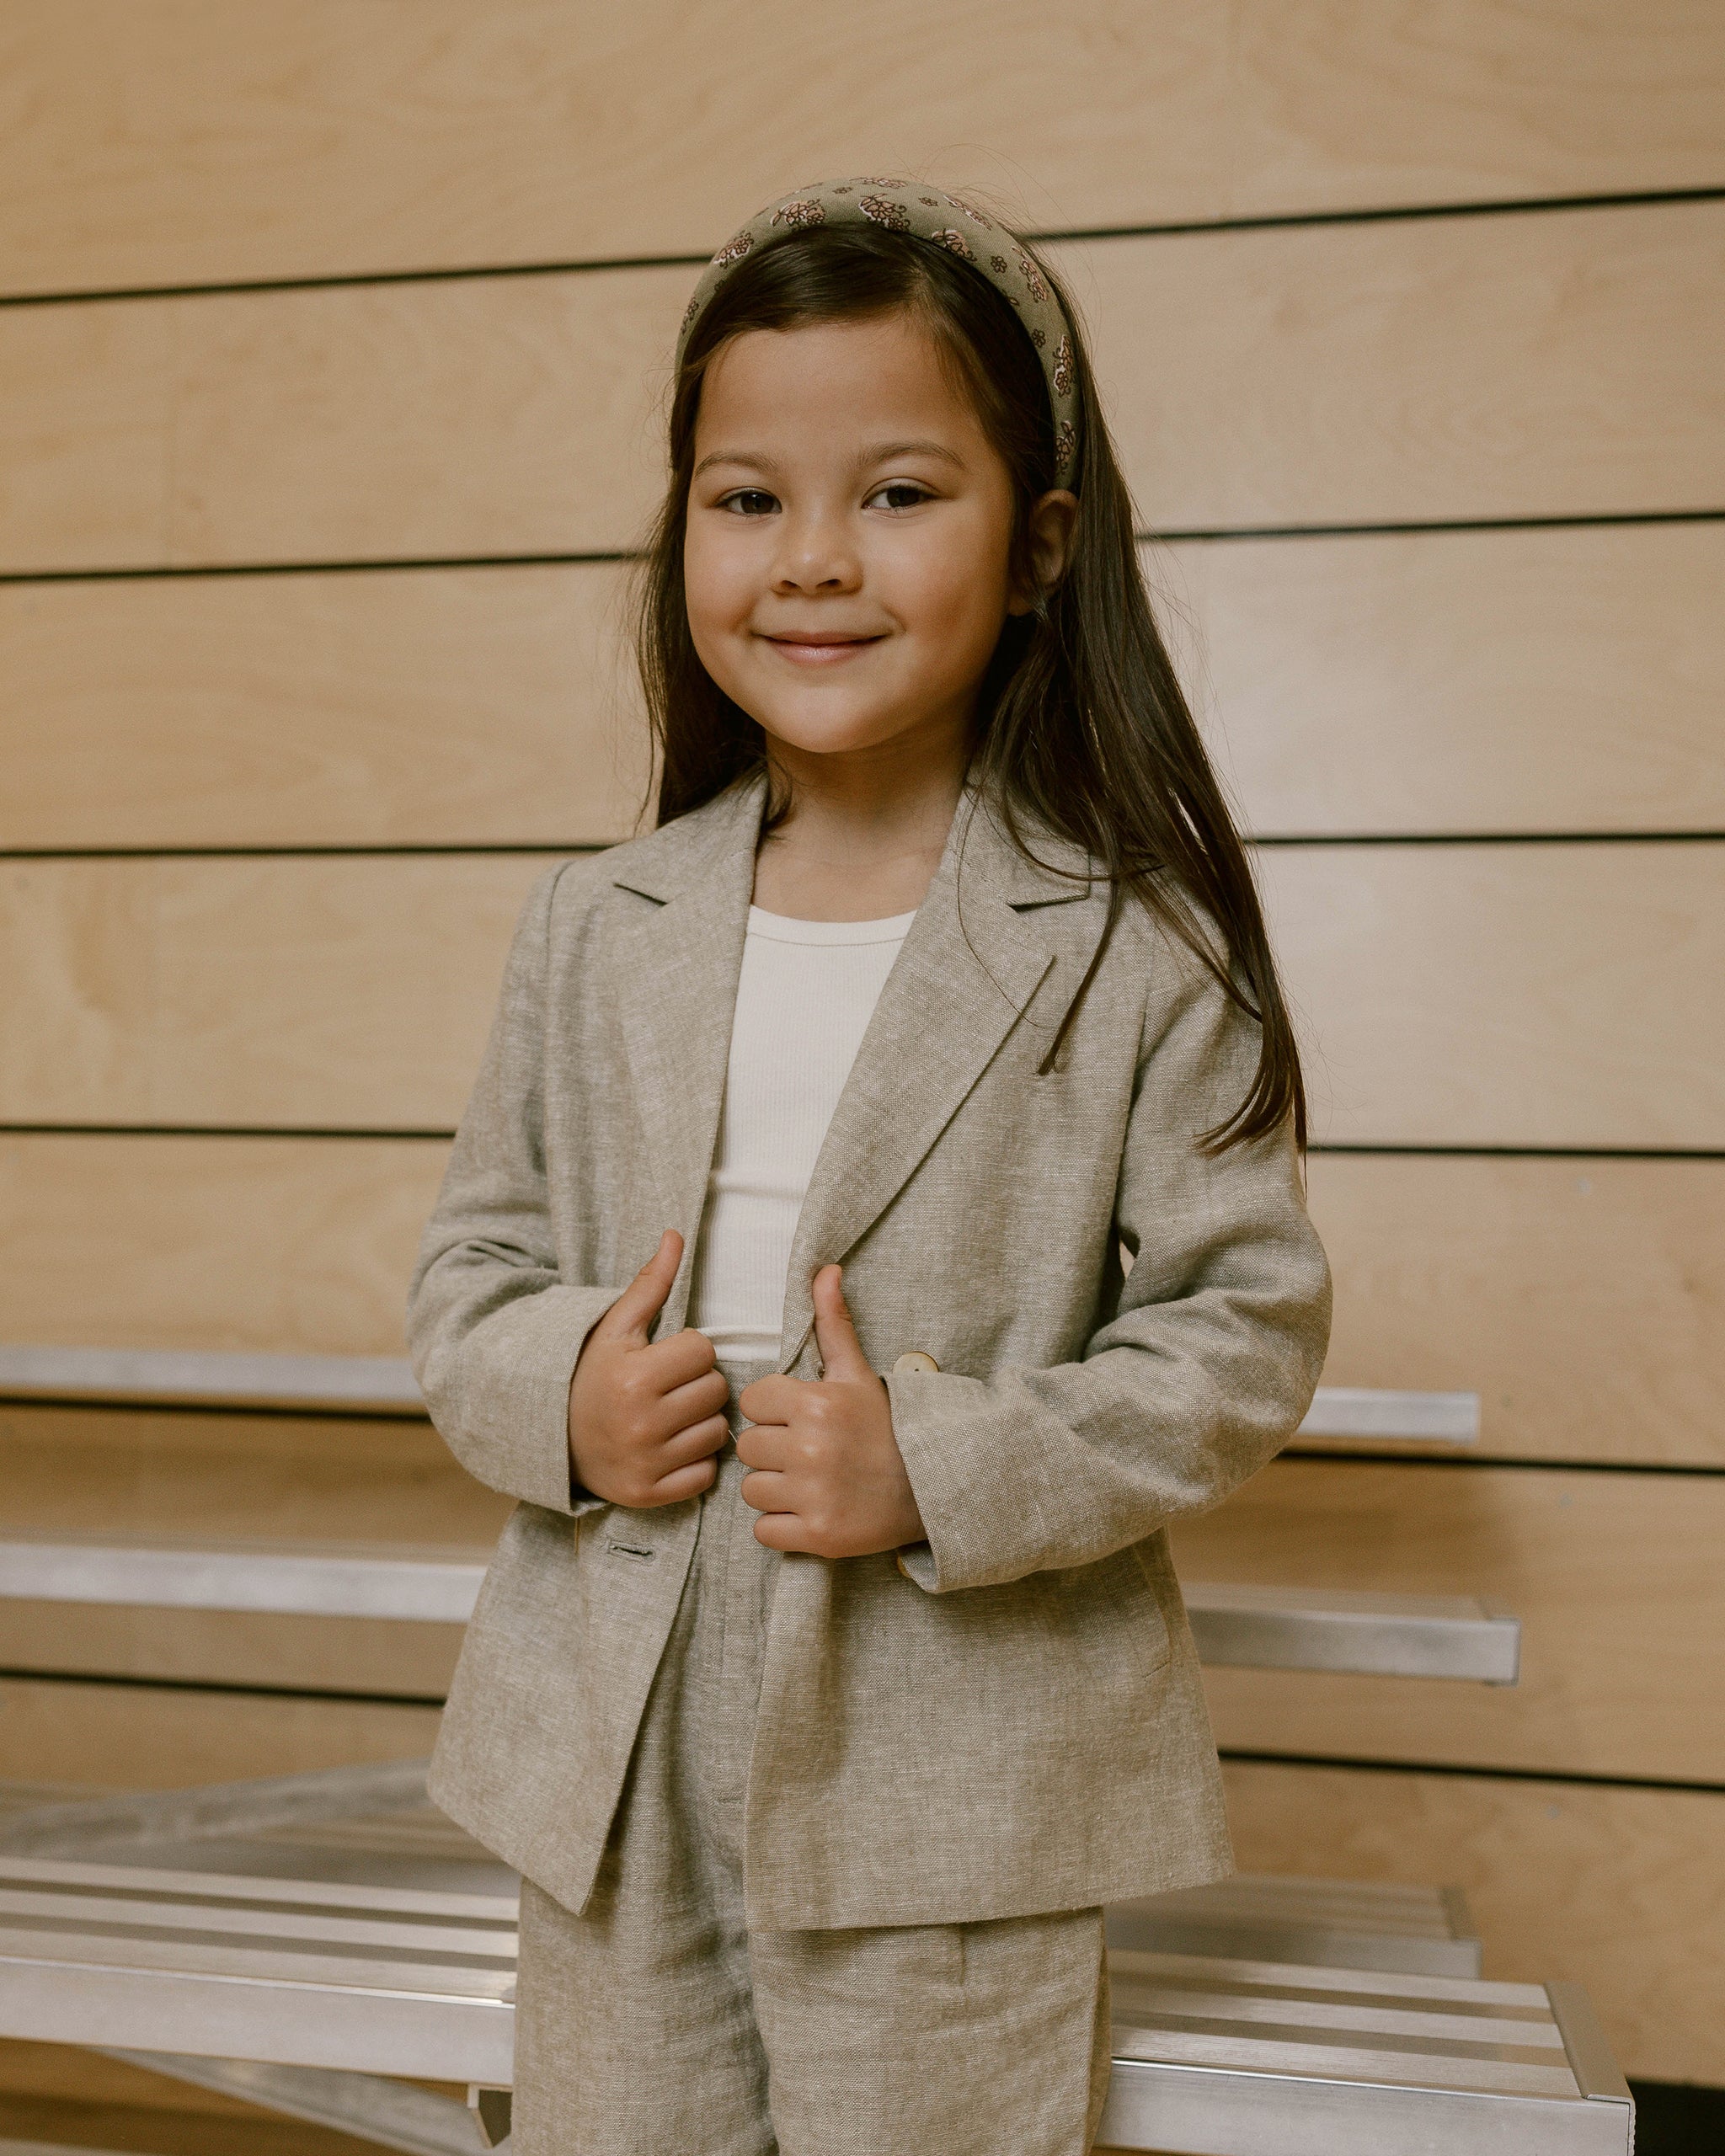 Double Breasted Blazer || Fern - Rylee + Cru | Kids Clothes | Trendy Baby Clothes | Modern Infant Outfits |